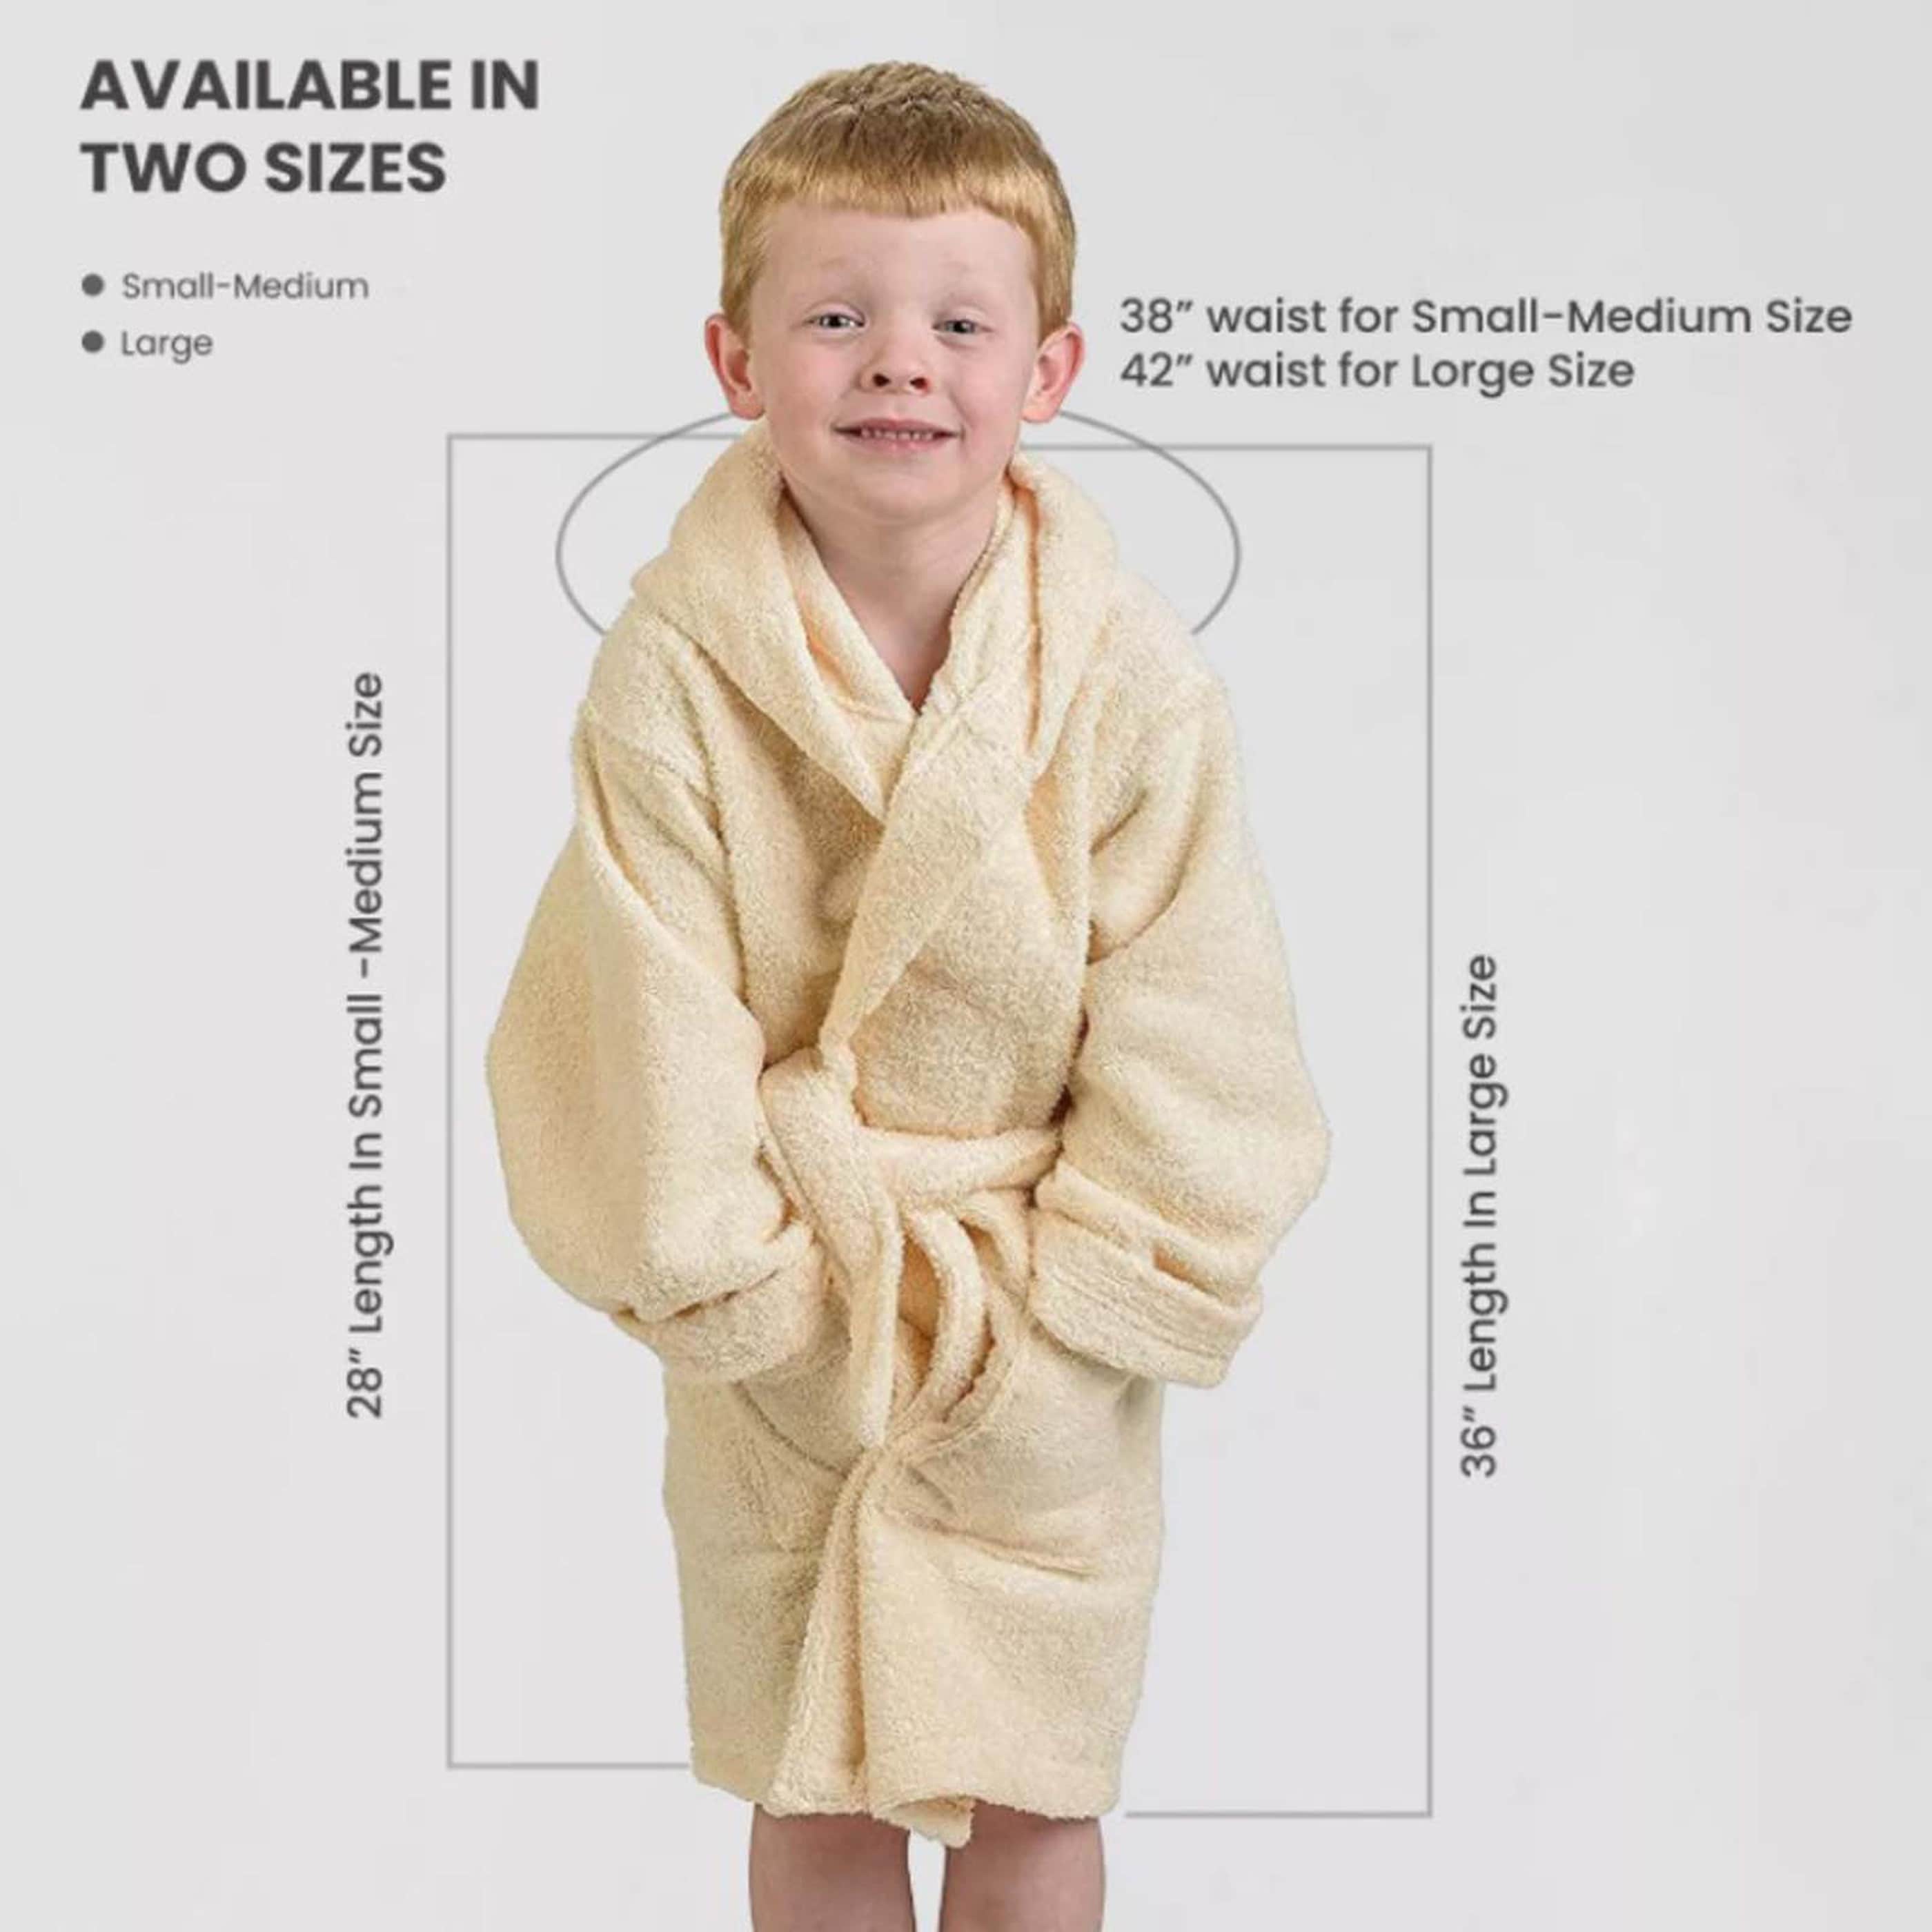 100% Cotton Absorbent Terry Velour Kids Hooded Bathrobe CHOOSE A SIZE